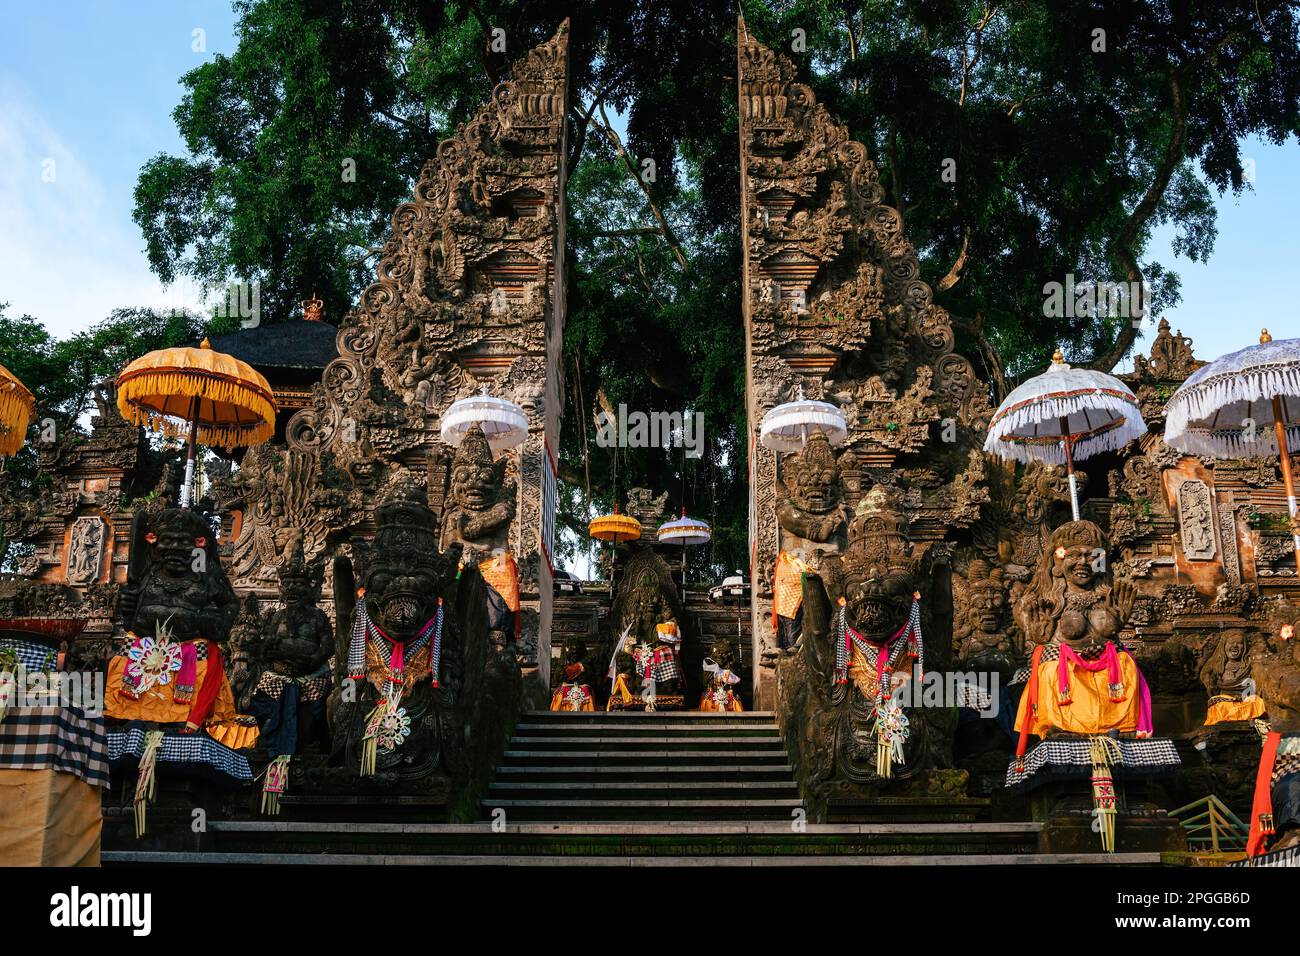 The stairway to the Indonesian temple Pura Dalem in Ubud in the evening. Stock Photo